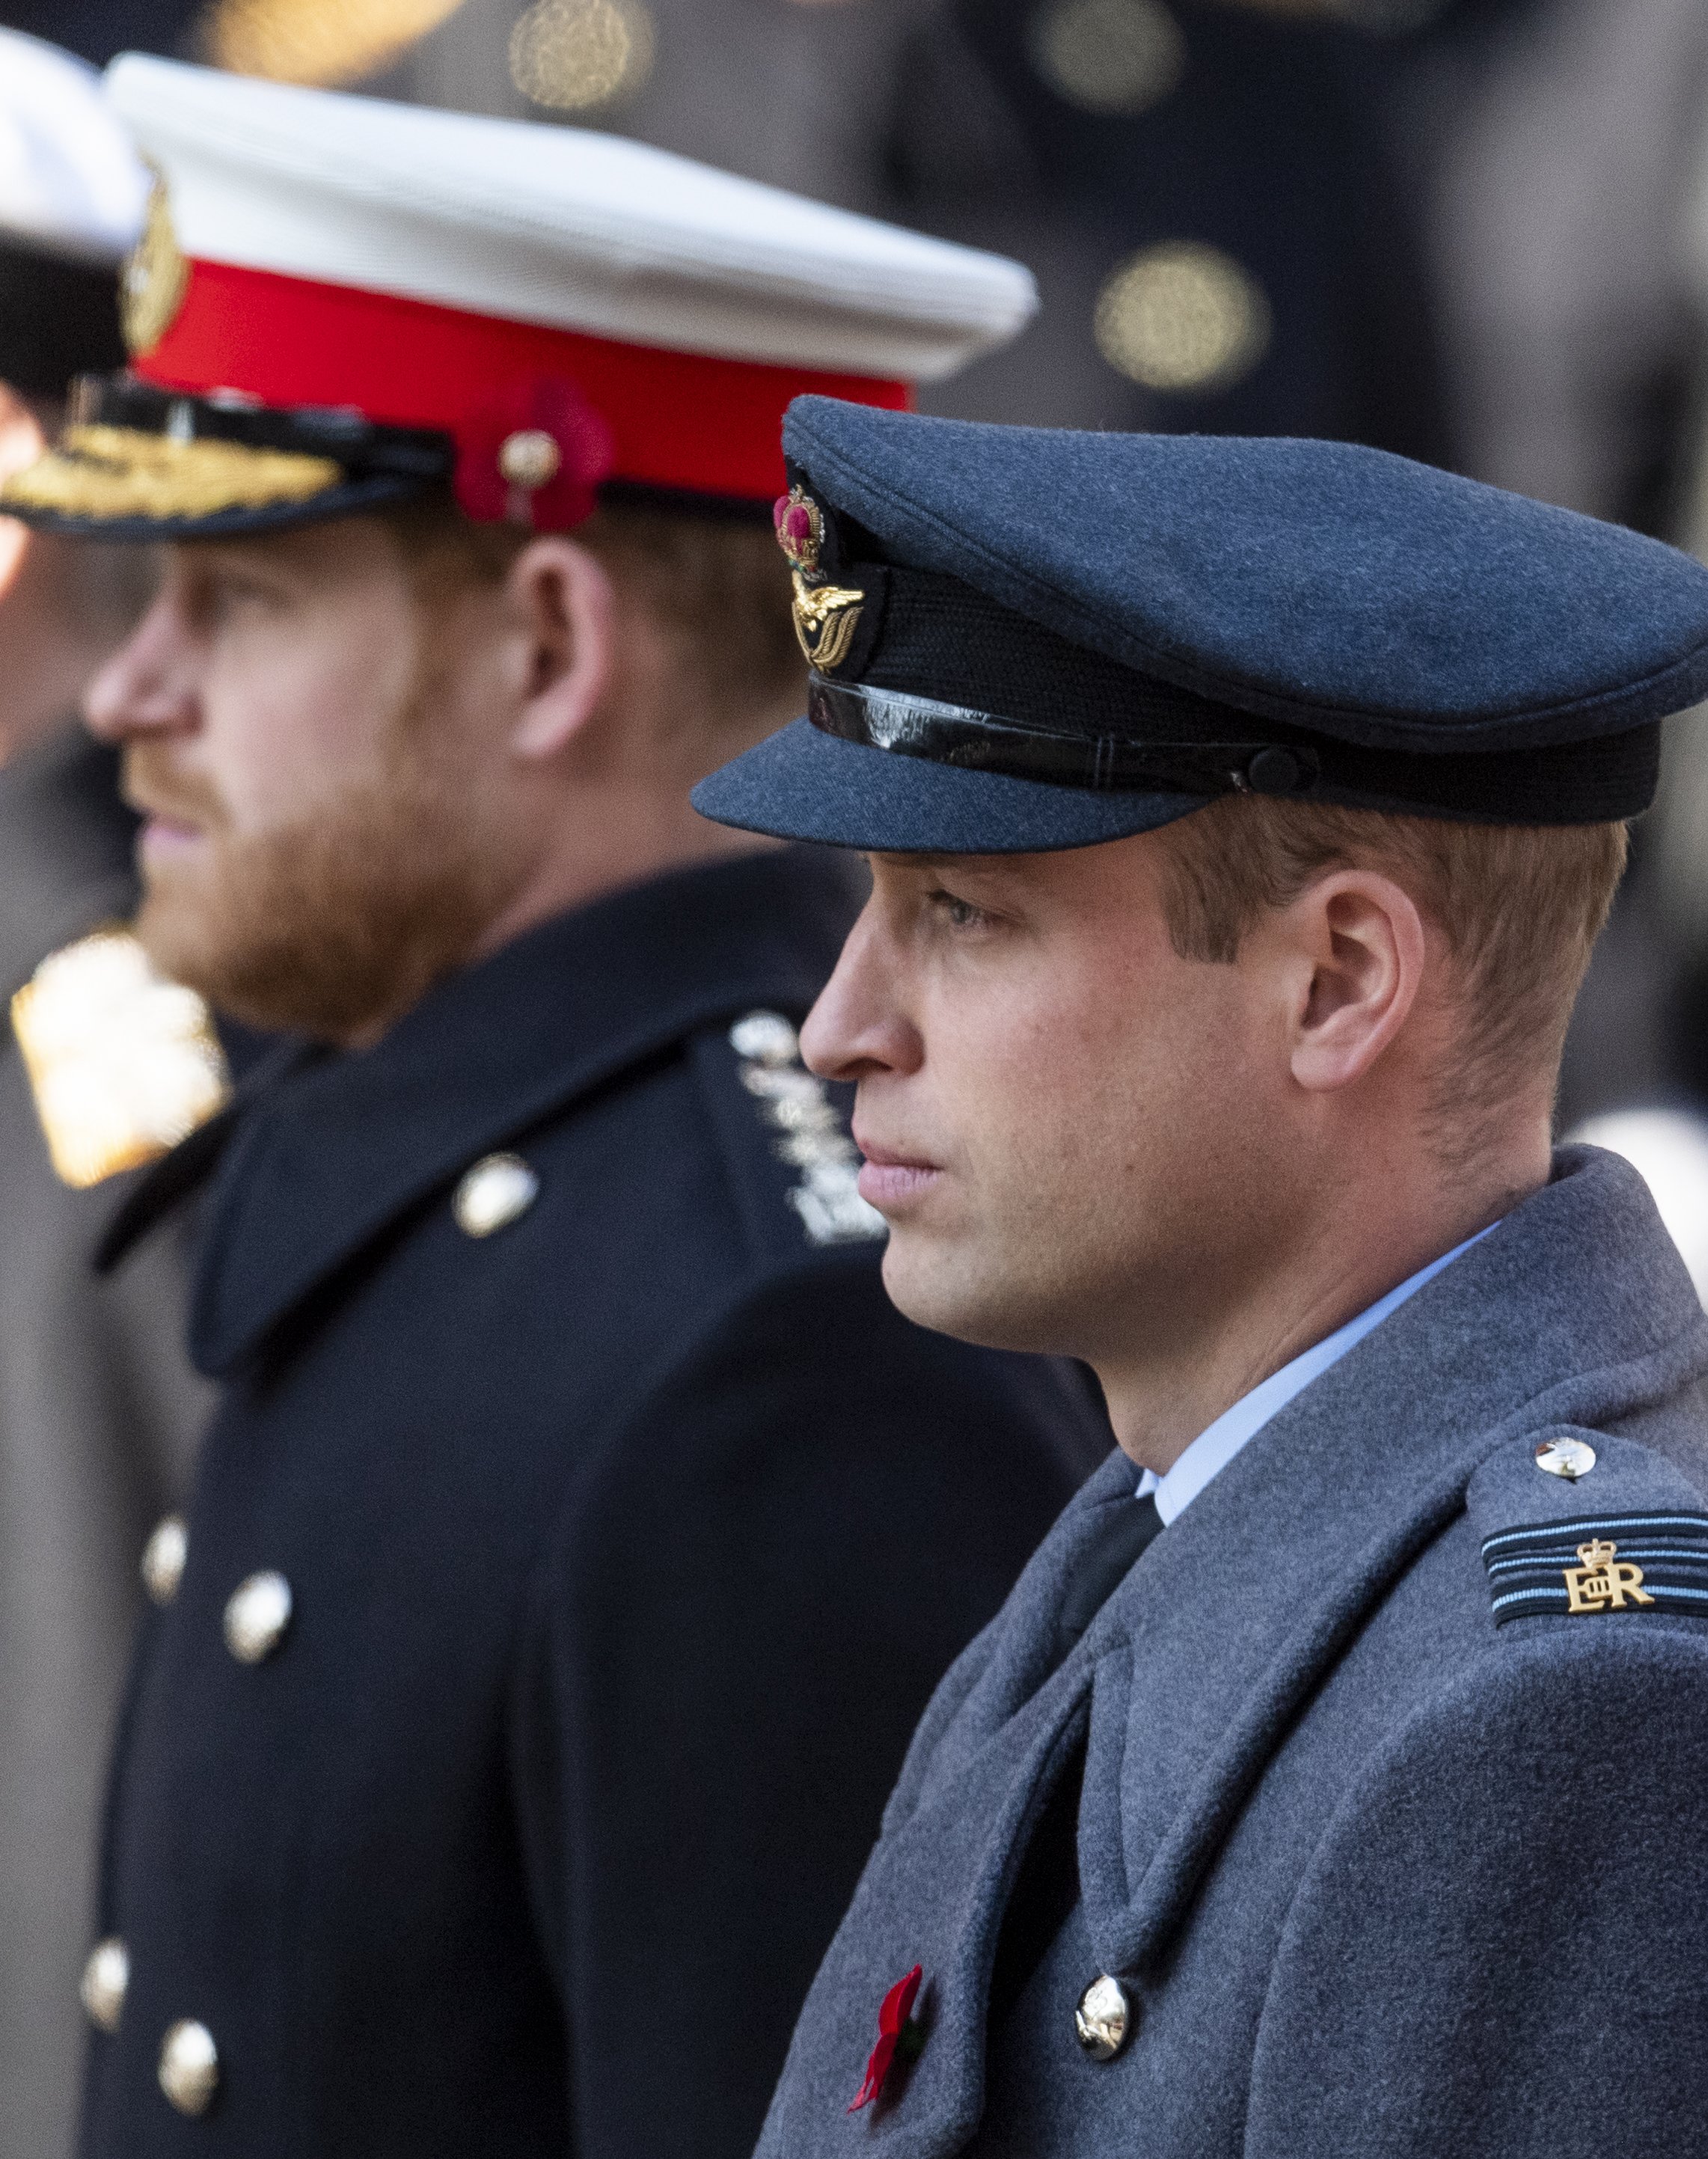 Prince William, Duke of Cambridge and Prince Harry, Duke of Sussex during the annual Remembrance Sunday memorial at The Cenotaph on November 10, 2019 in London, England. / Source: Getty Images